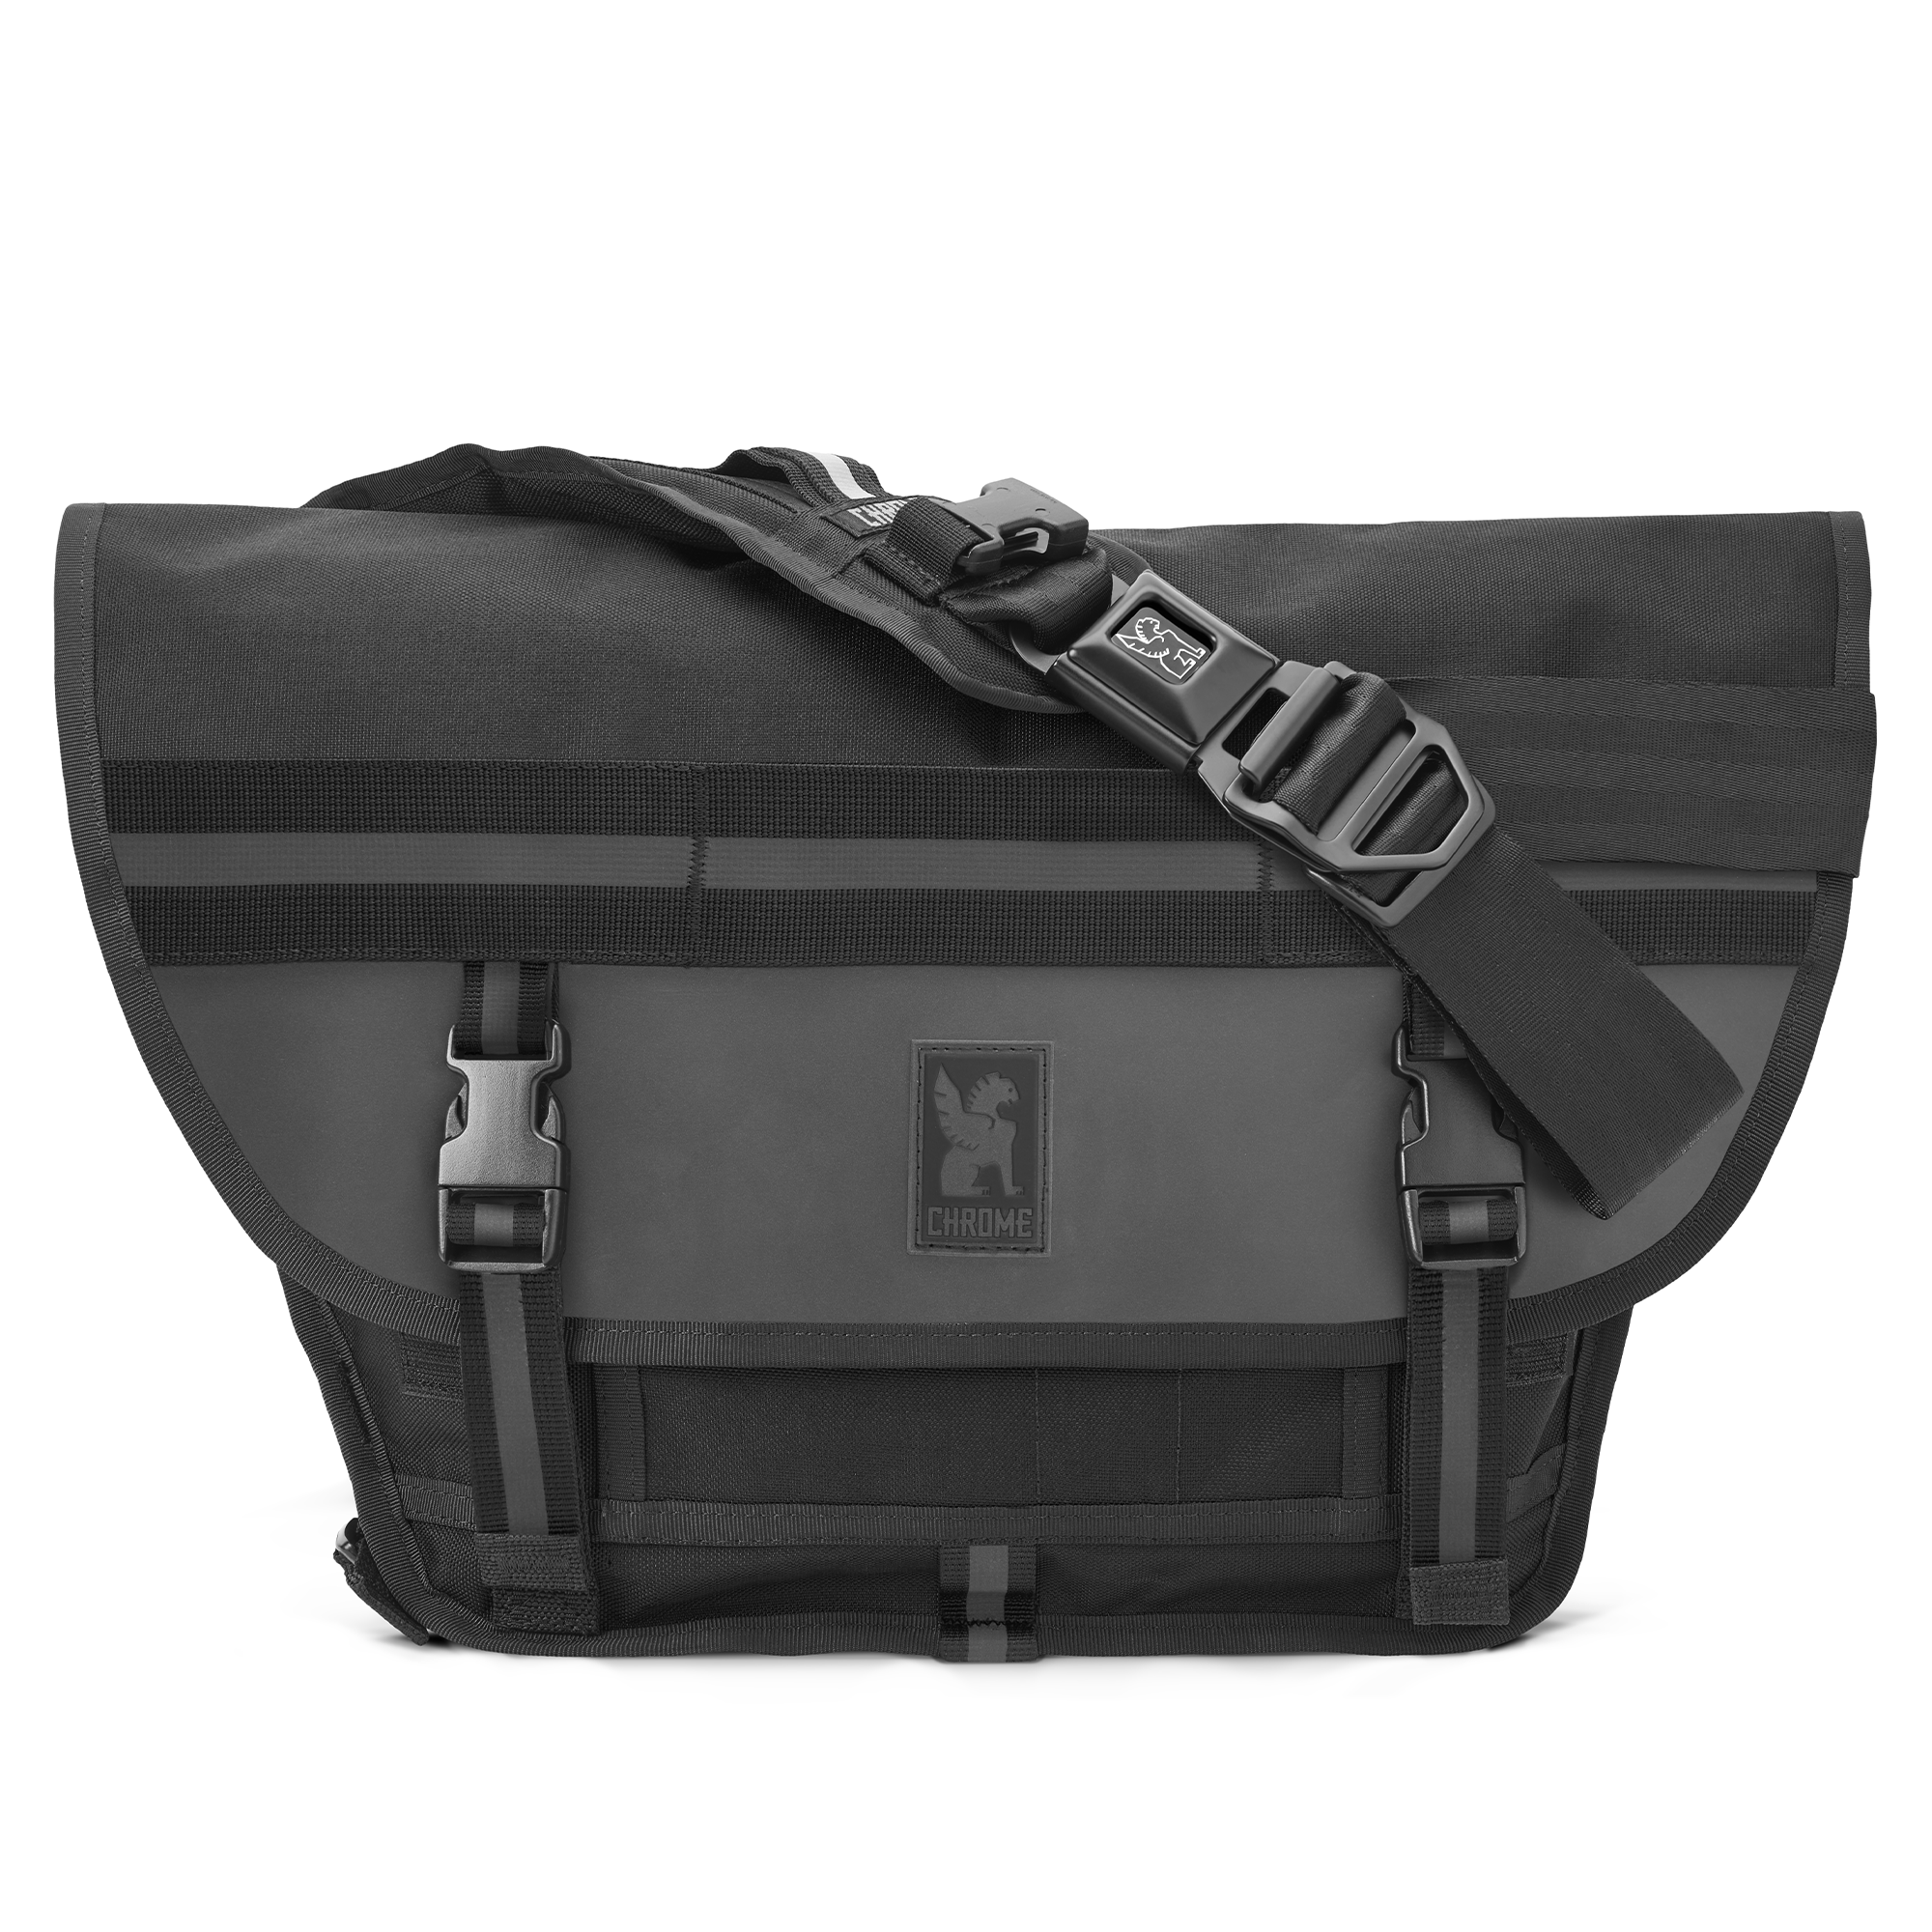 Mini Metro Messenger in reflective black showing reflectivity #color_night